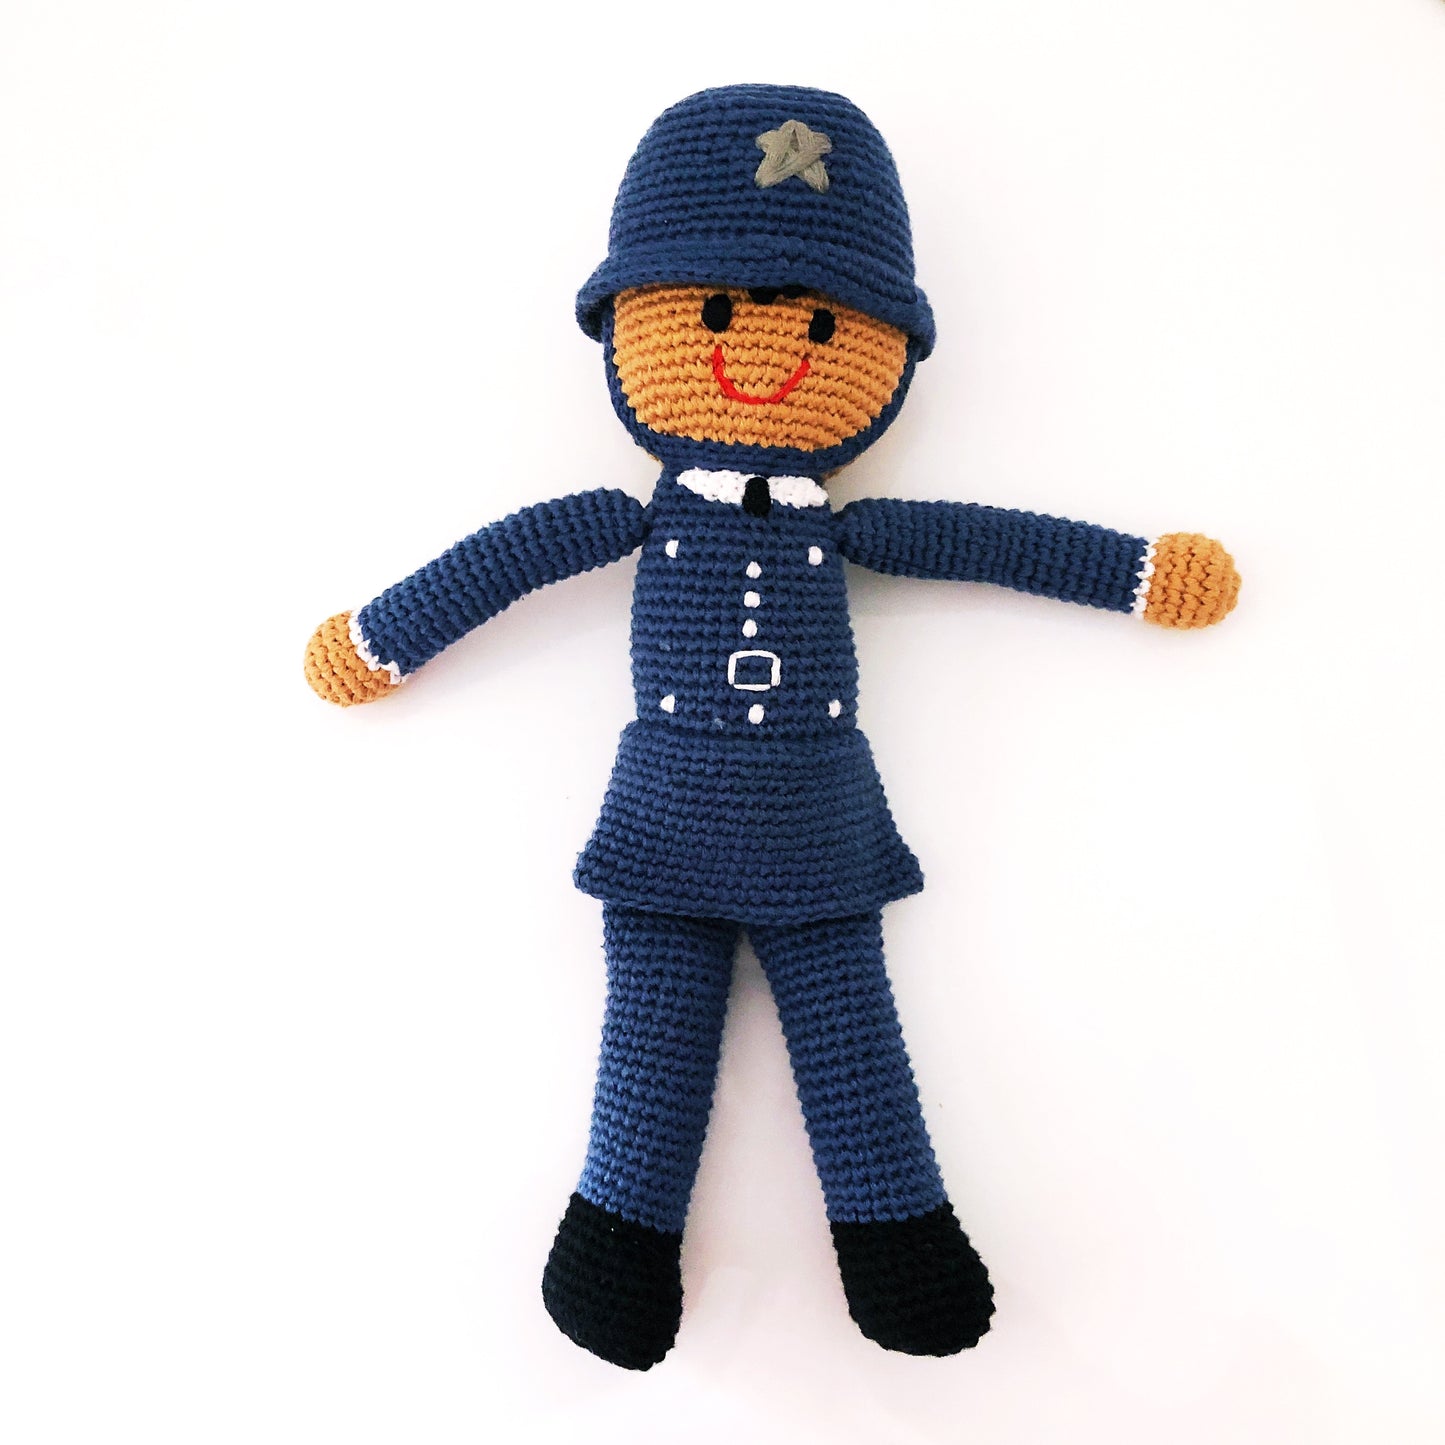 Large Doll Police Officer by Pebblechild